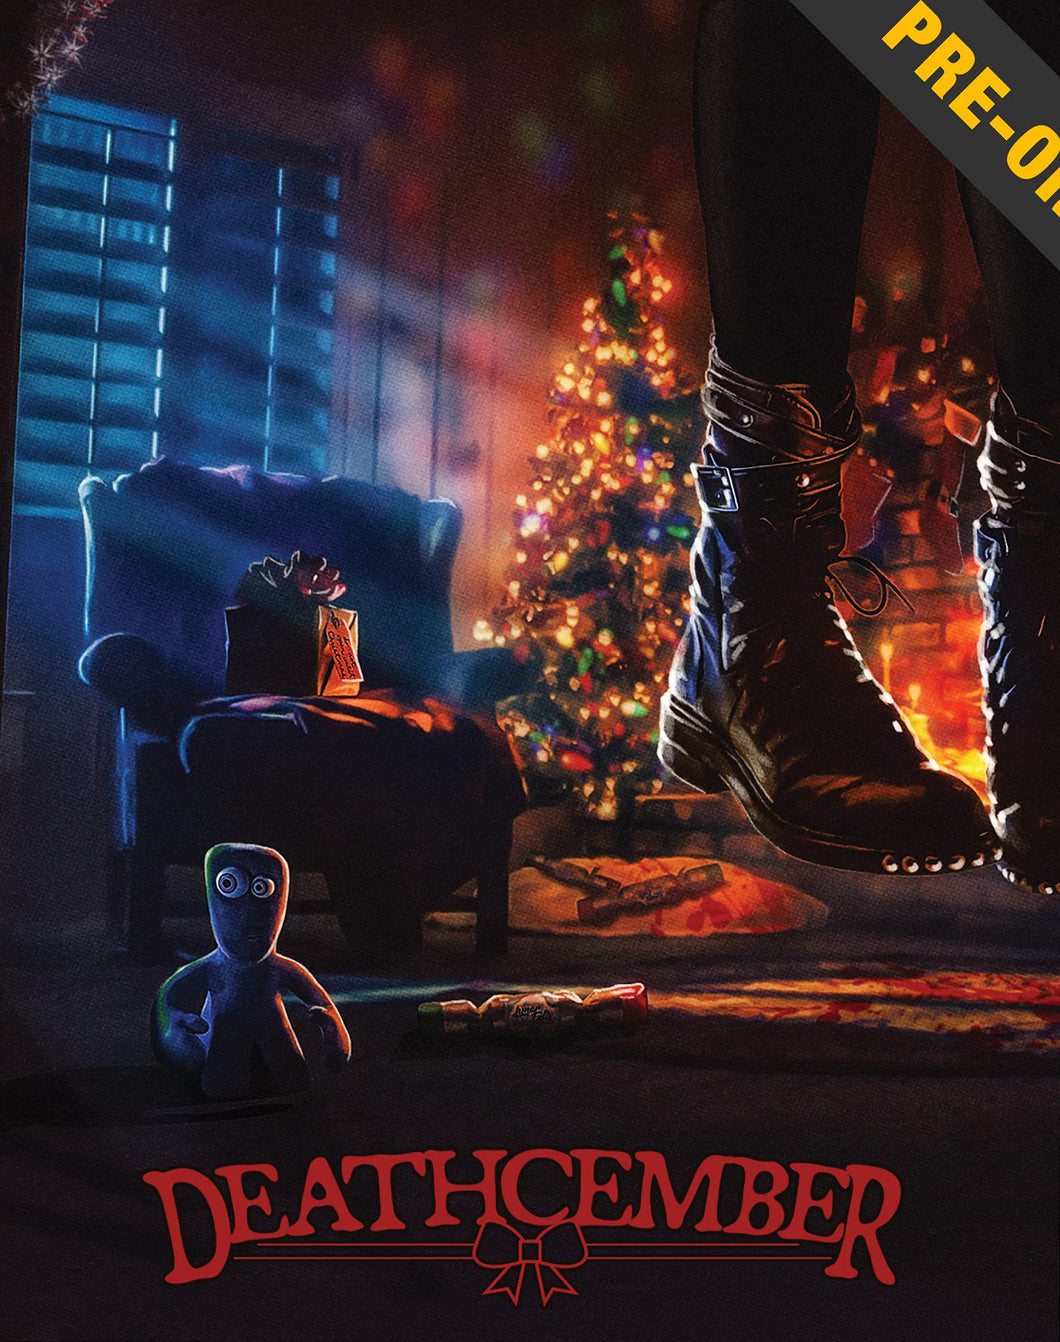 Deathcember (2019) - front cover